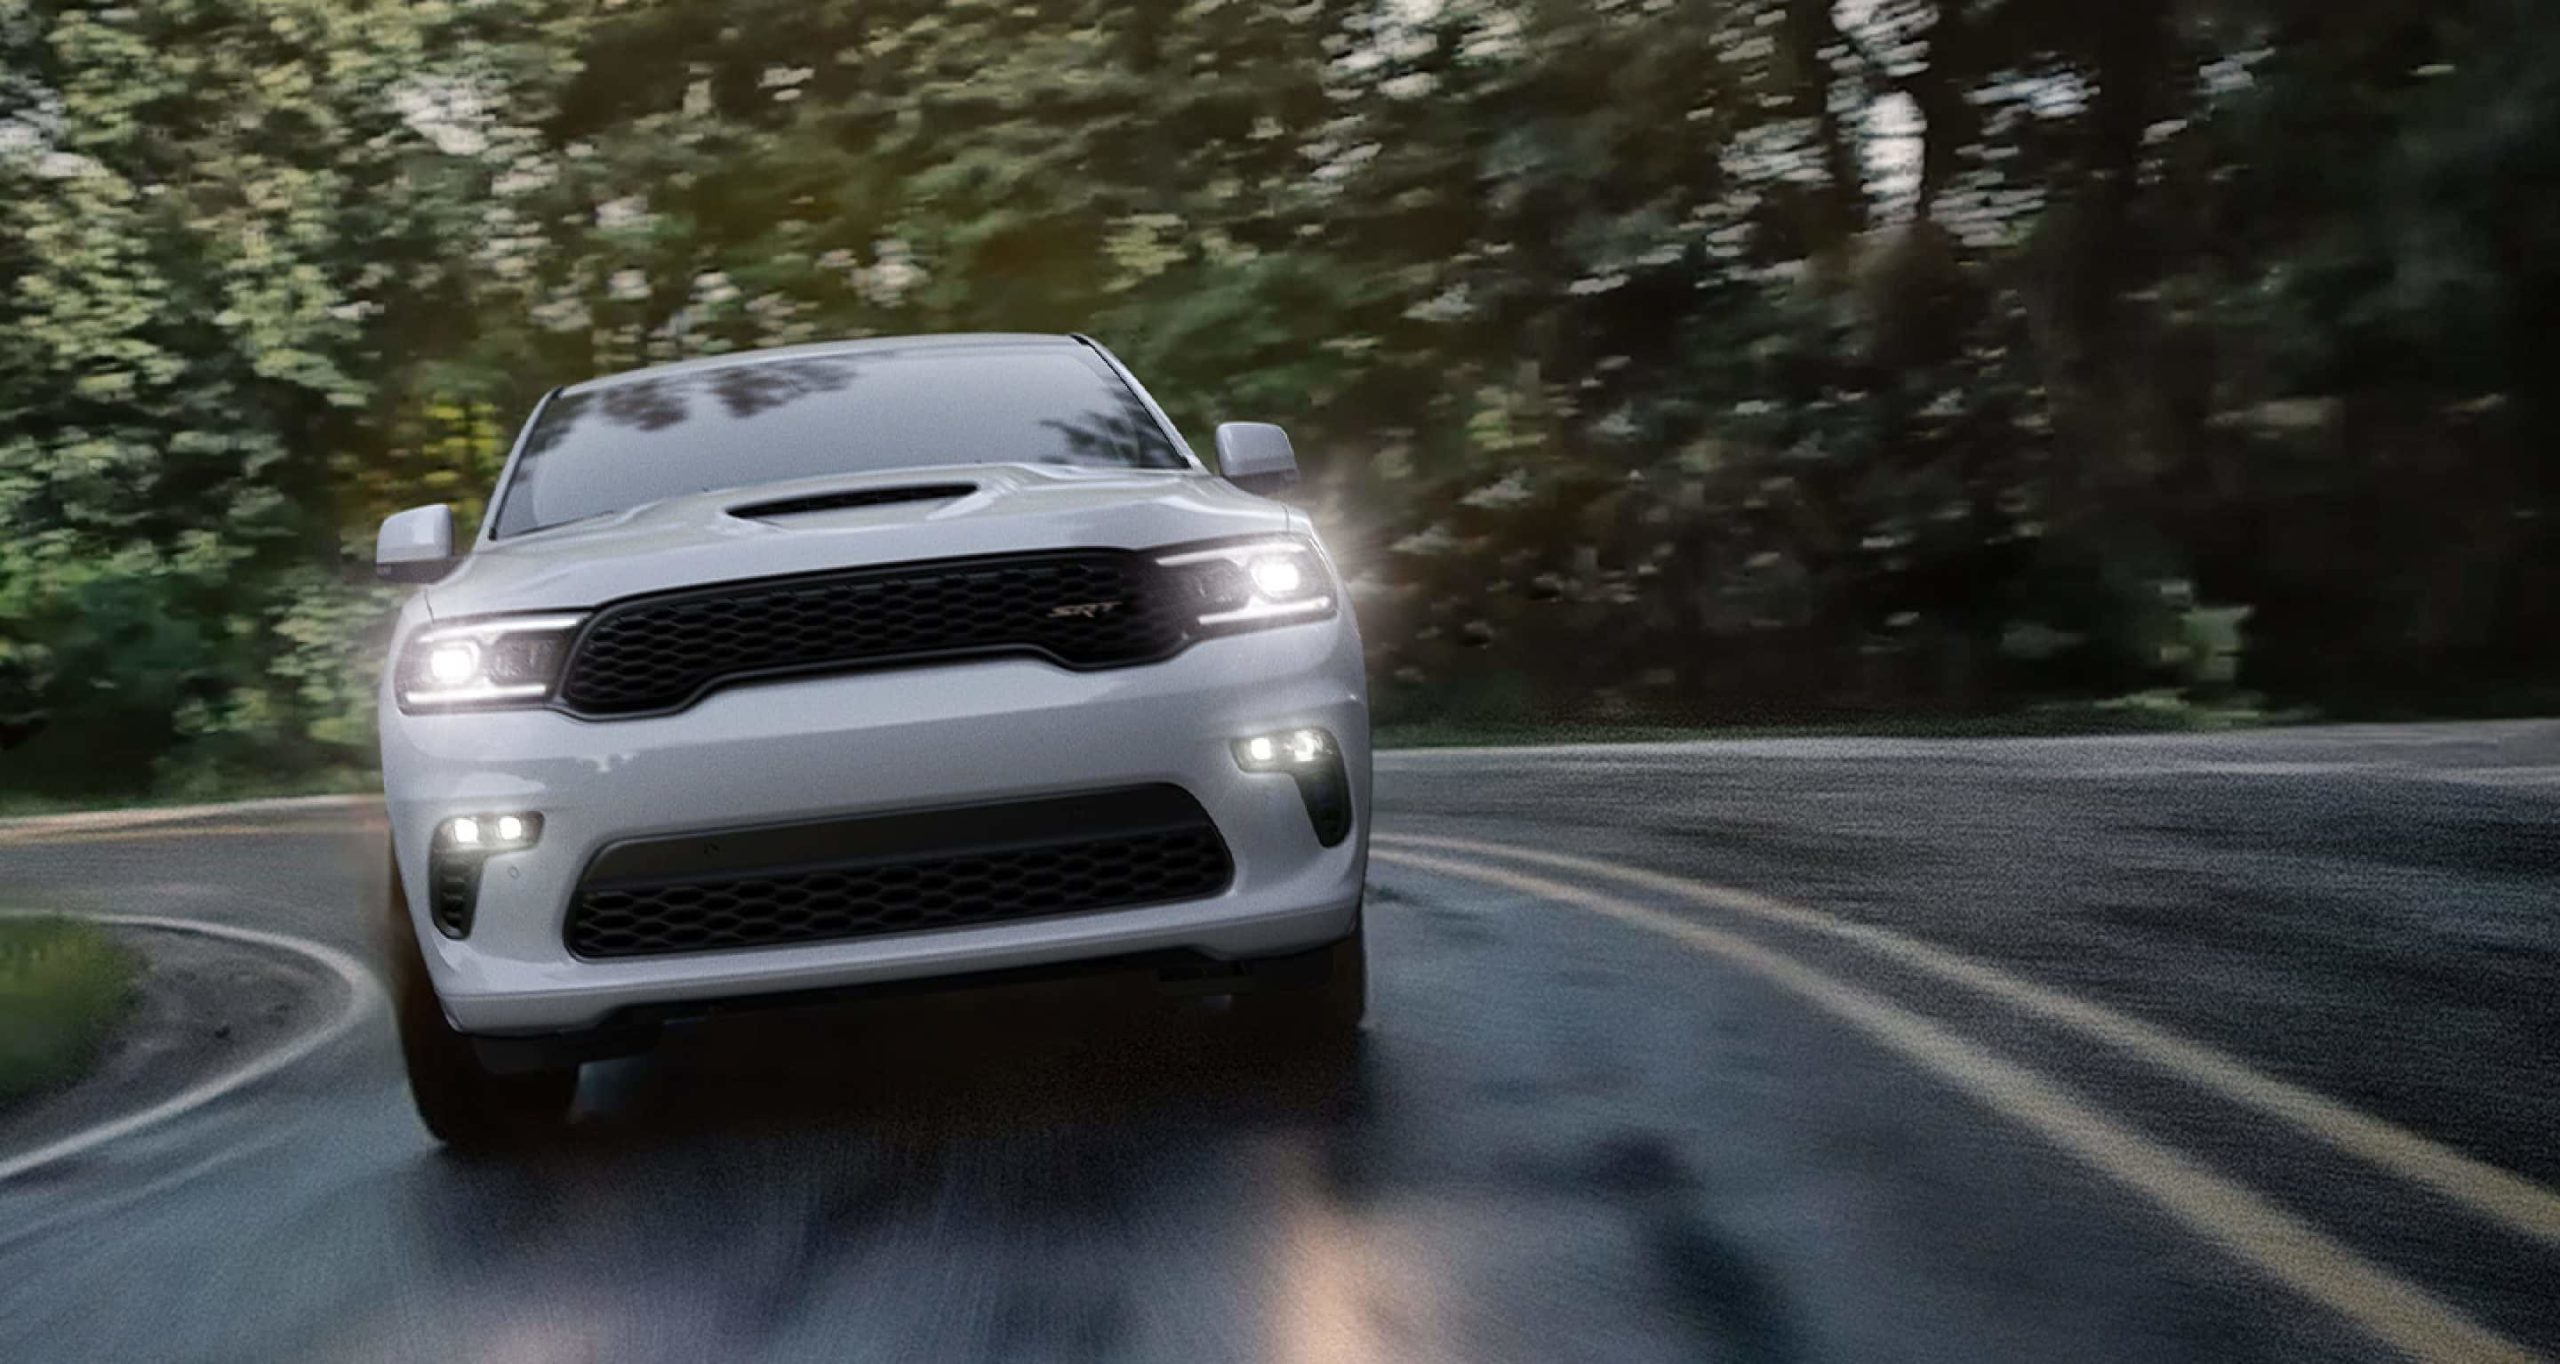 A grey 2022 Dodge Durango SRT is shown from the front driving in a rain storm.